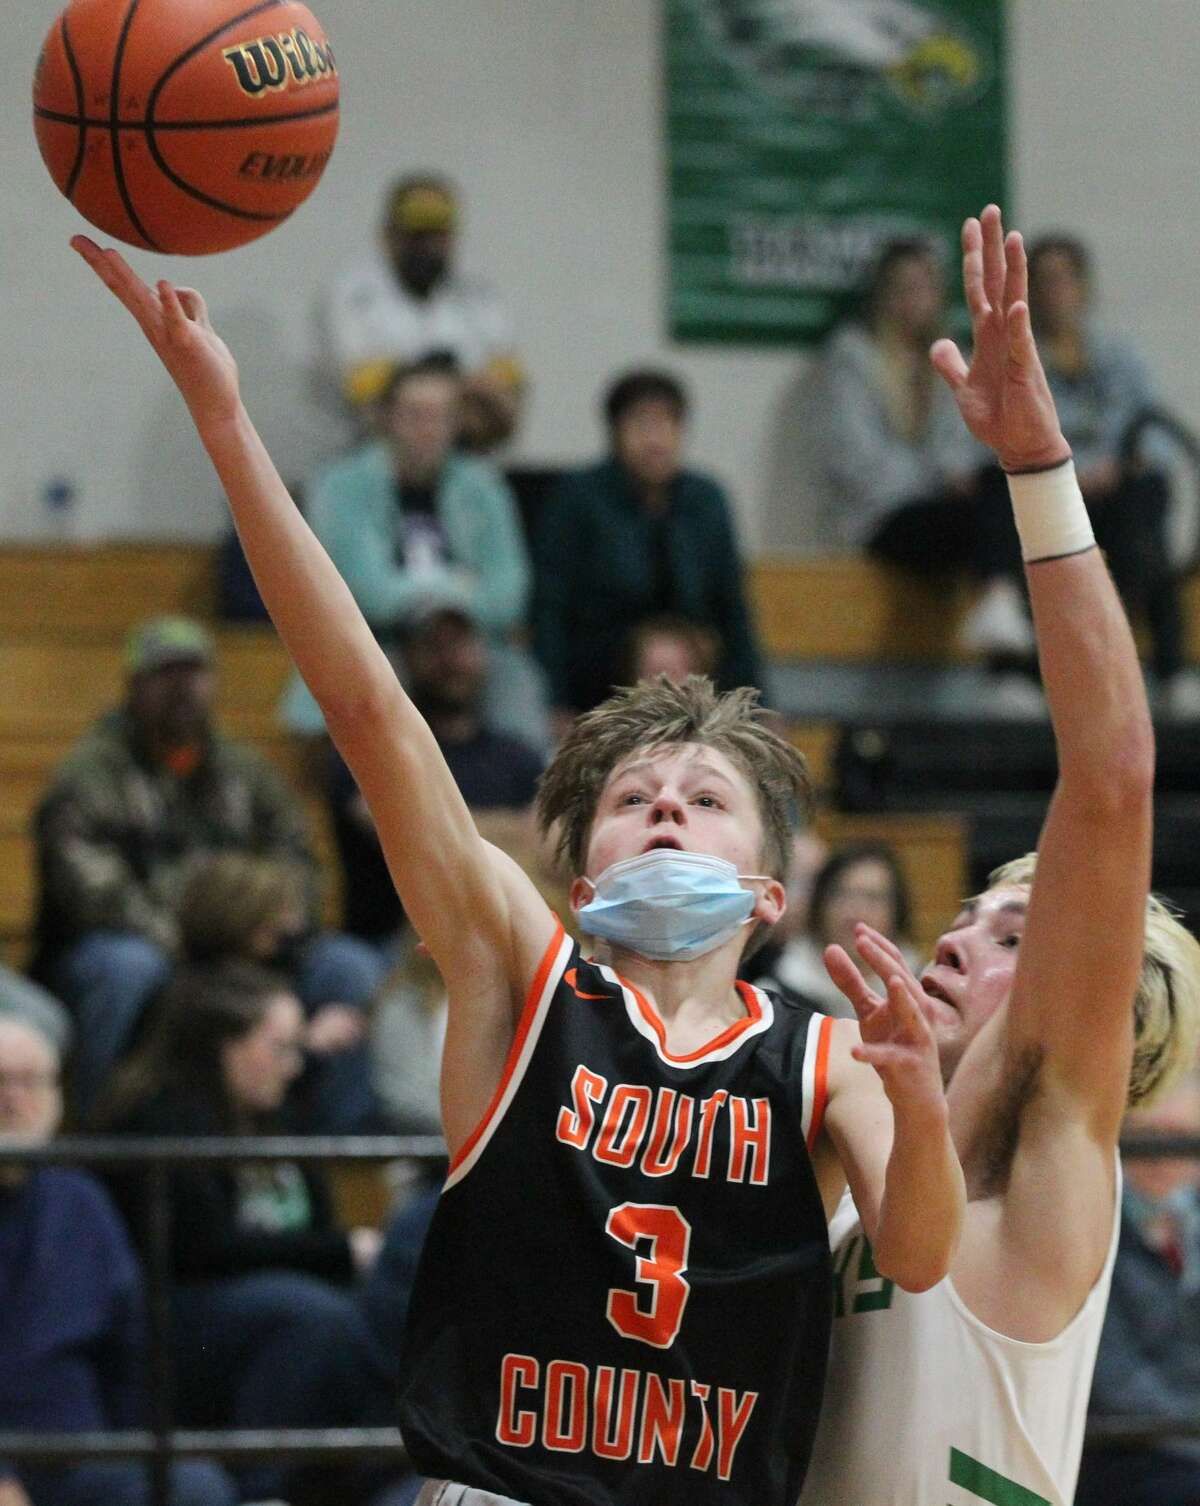 South County's Trevor Colwell puts up a shot during a boys' basketball game against Carrollton in the first round of the Waverly Holiday Tournament on Monday.